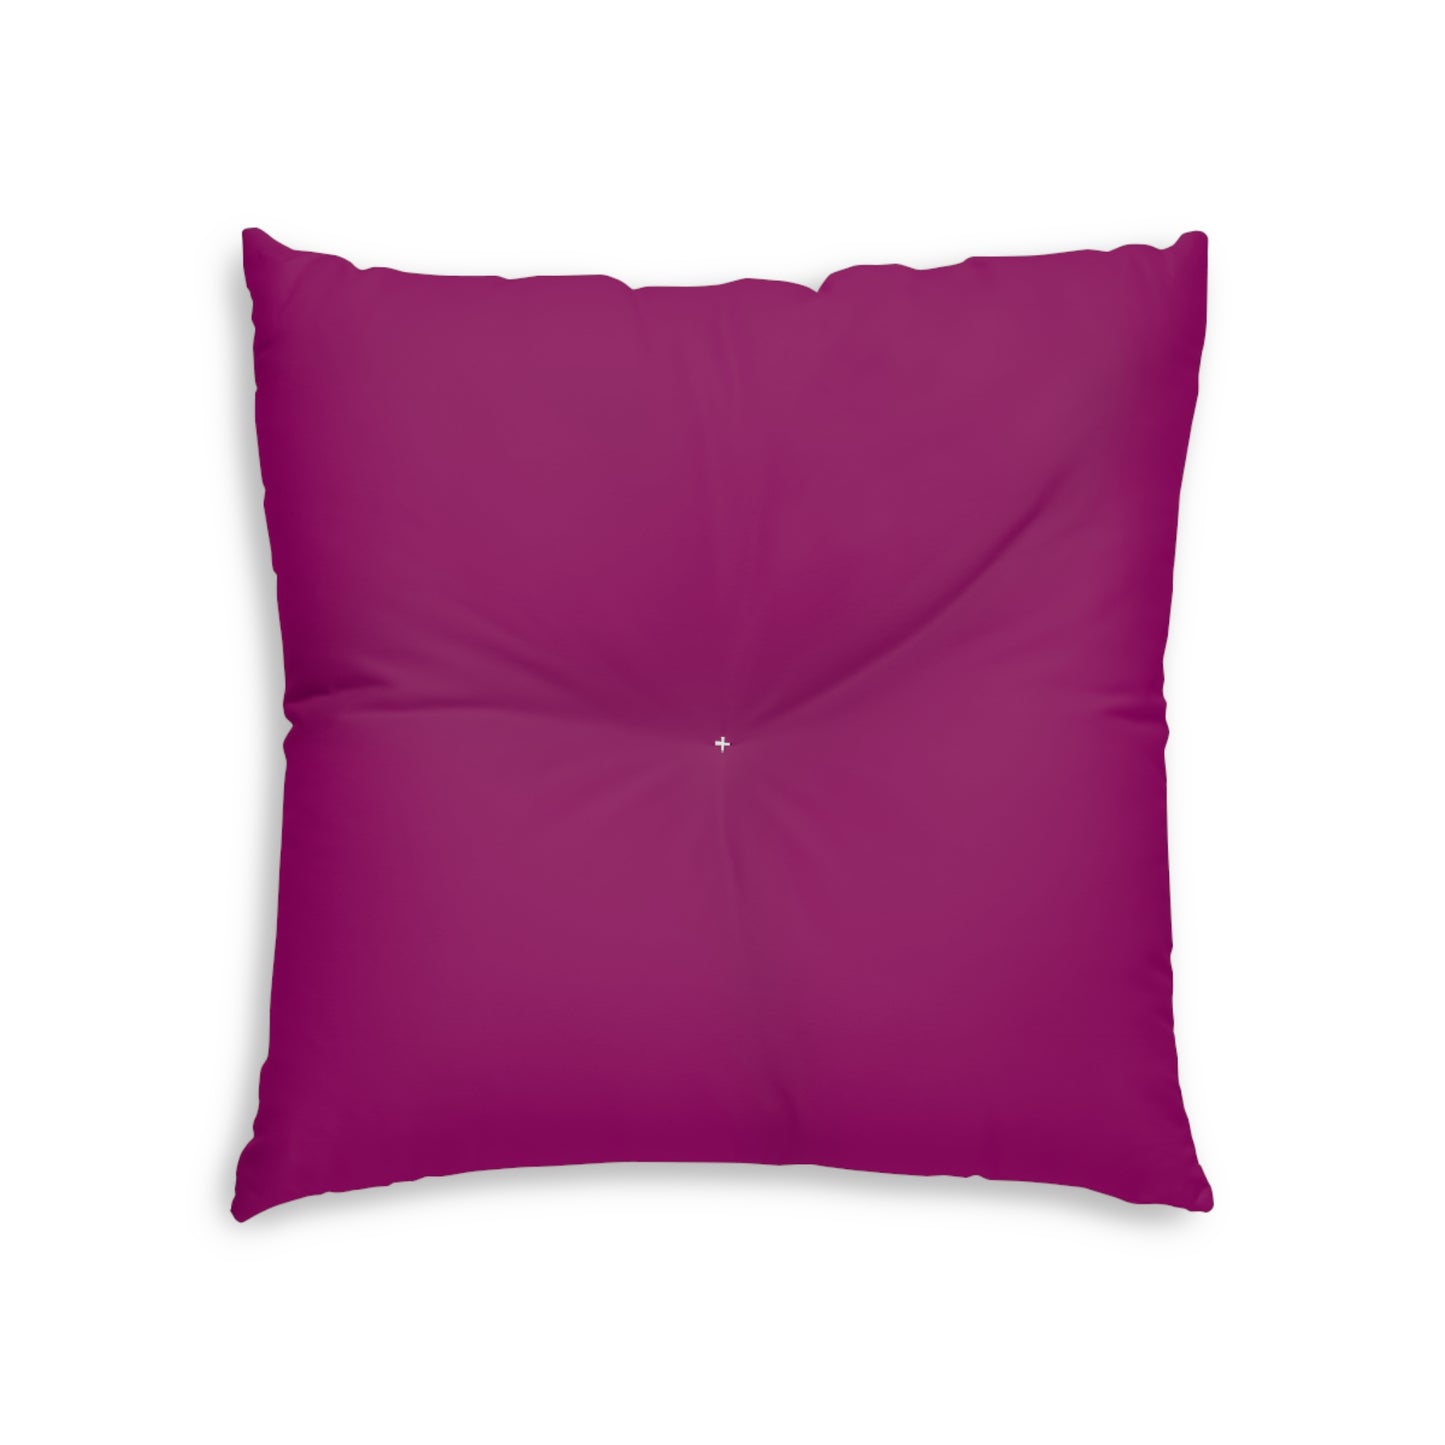 Pink Tufted  Square Floor Pillow with Star Illustration